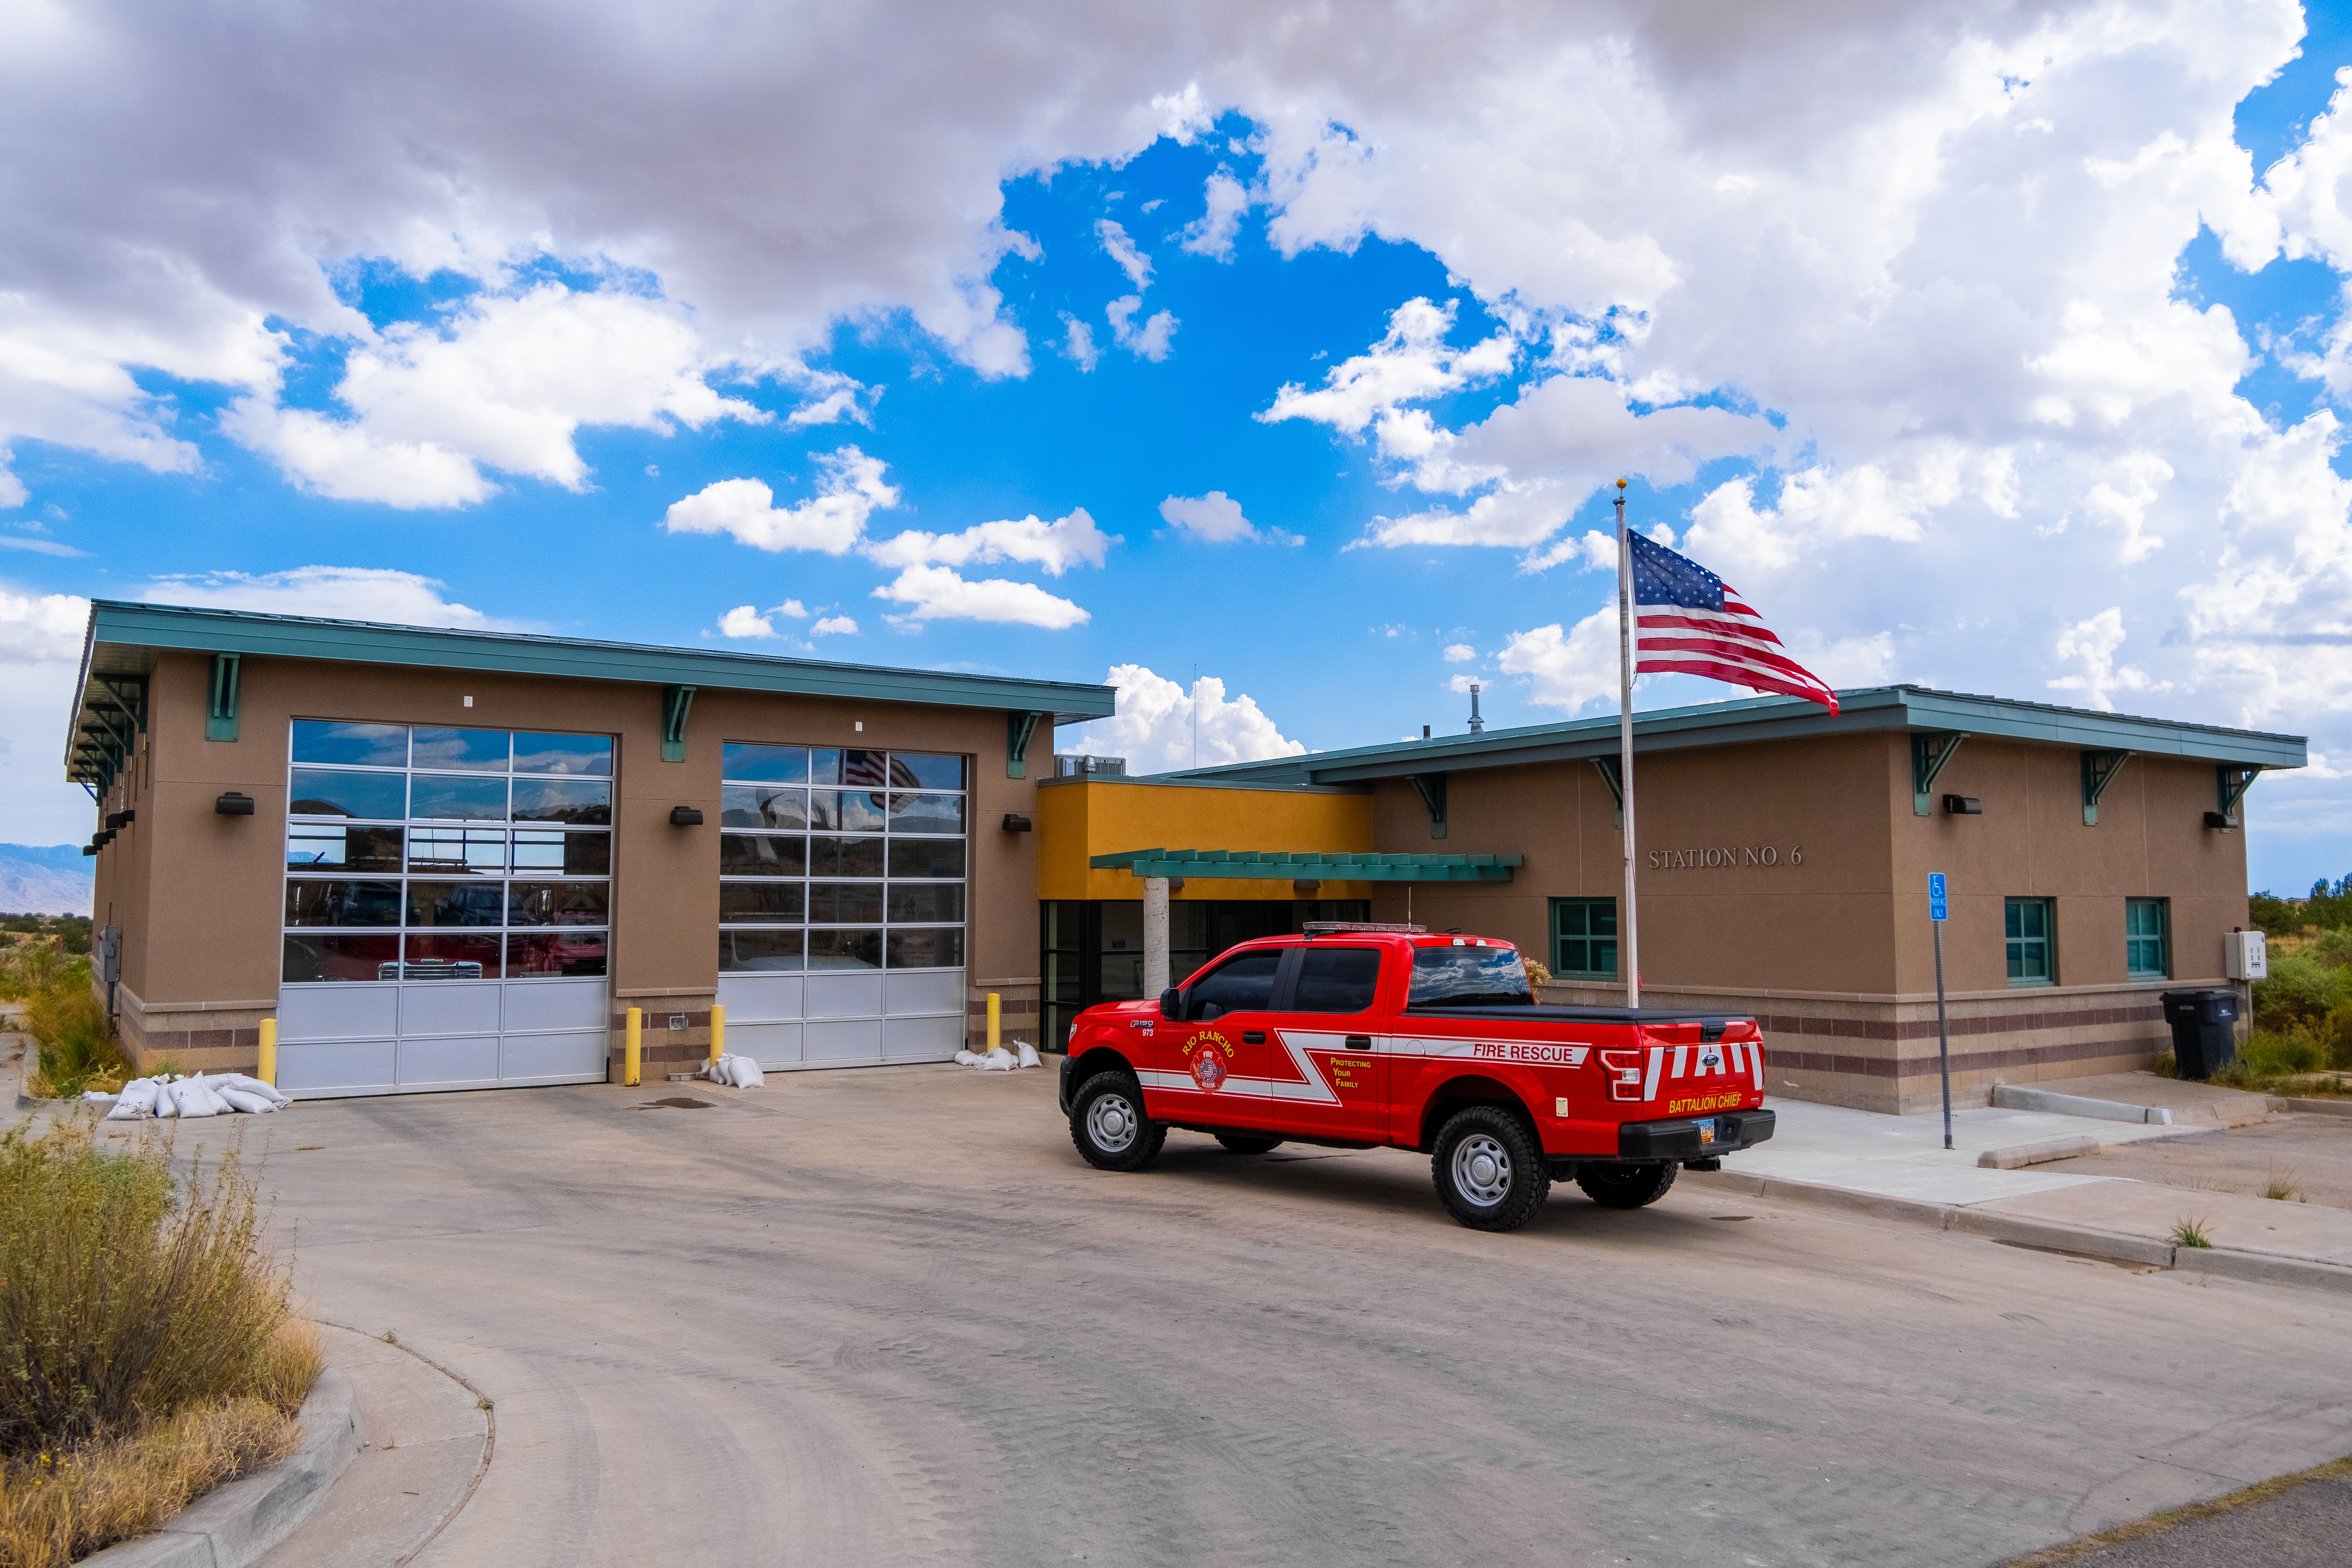 Rekindling Safety: Mariposa Welcomes the Reopening of Fire Station 6